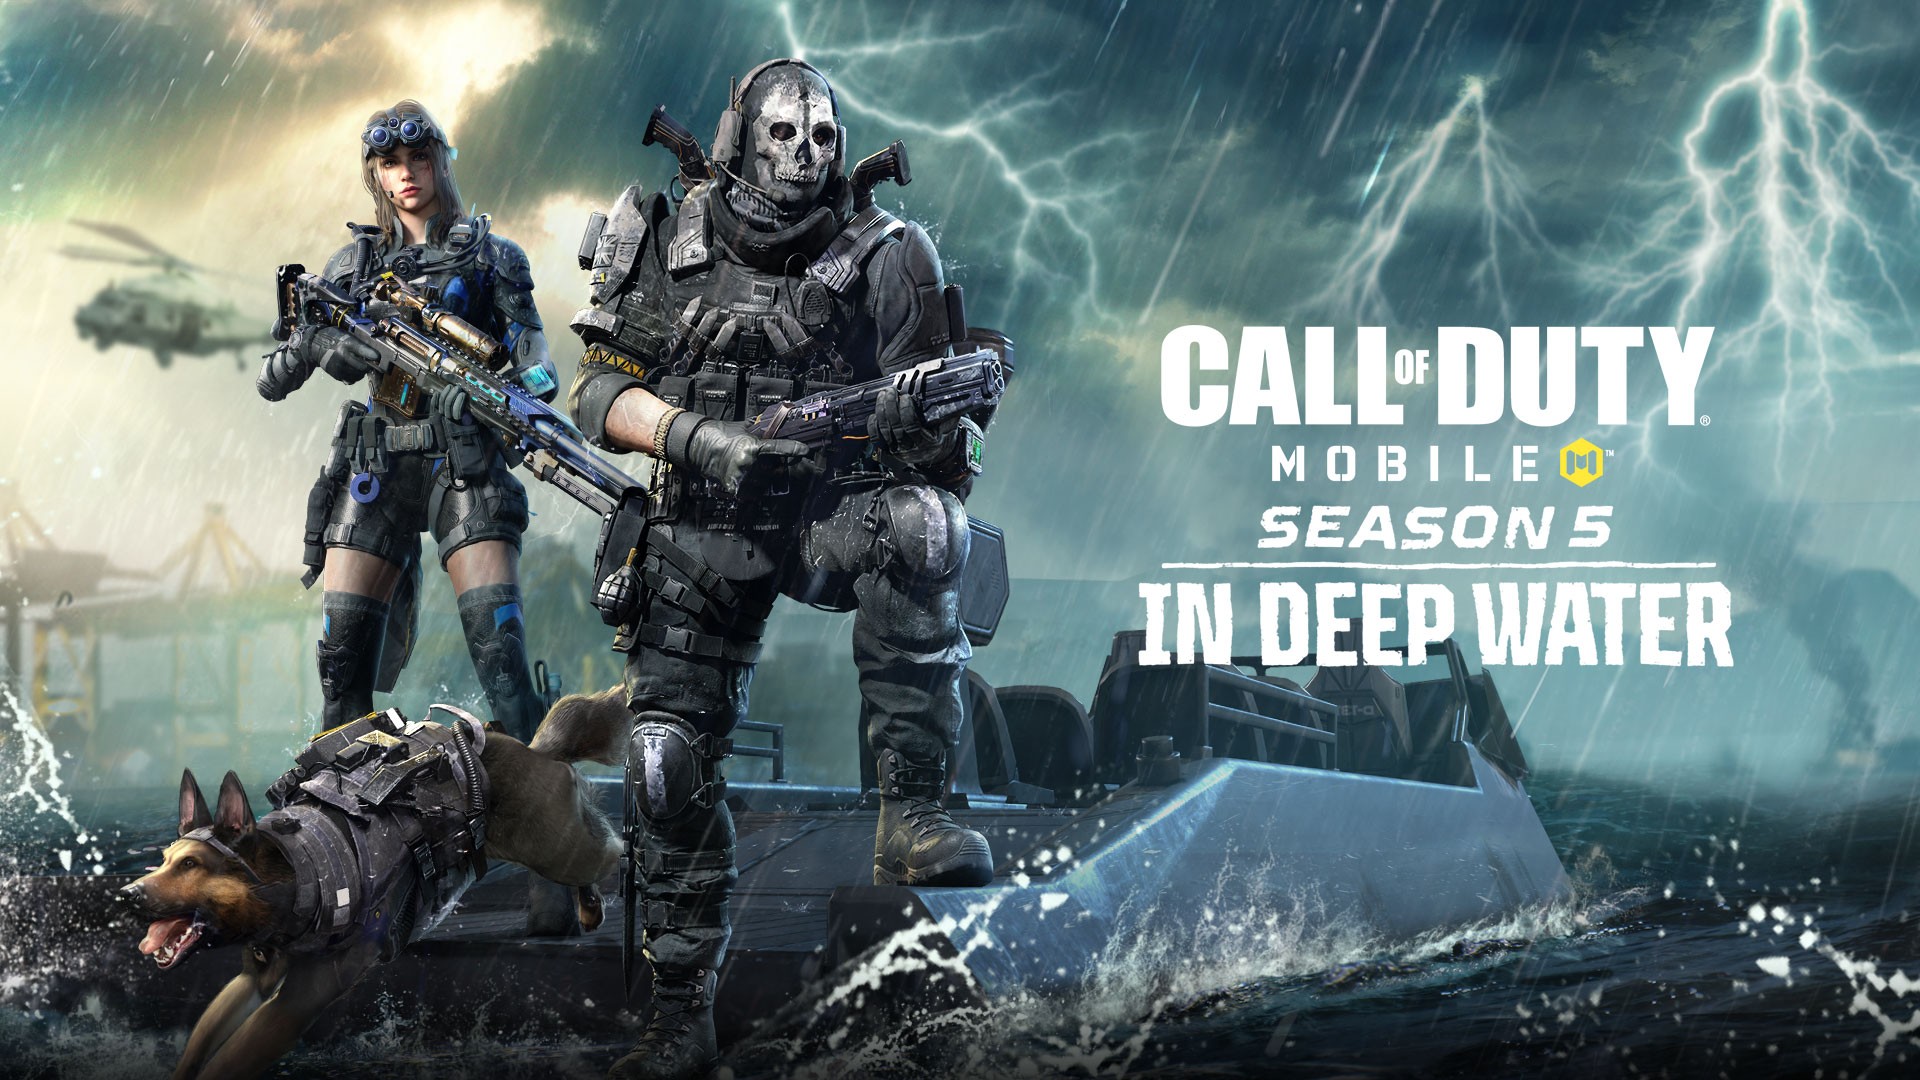 Call of Duty: Mobile Season 5: In Deep Water Launches Tuesday 29th June AEST